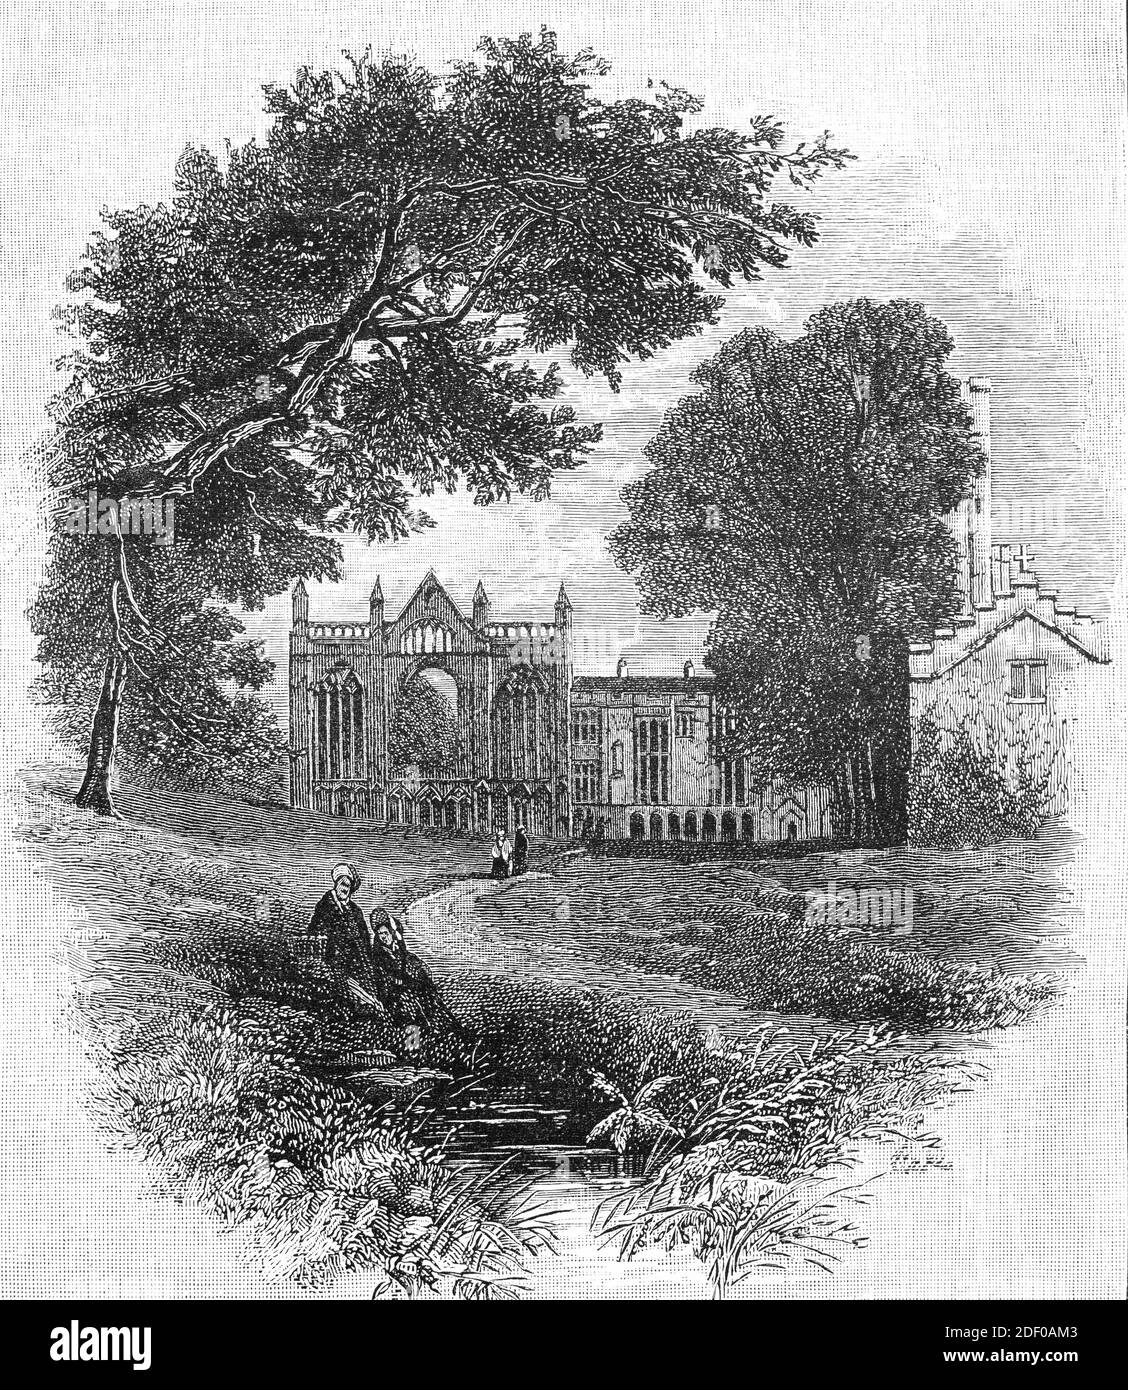 A 19th Century view of Newstead Abbey, in Nottinghamshire, England. Formerly it was an Augustinian priory founded by King Henry II circa 1170, one of many penances he paid following the murder of Thomas Becket. Sir John Byron of Colwick in Nottinghamshire was granted Newstead Abbey by Henry VIII of England on 26 May 1540 and started its conversion into a country house following the Dissolution of the Monasteries, it is now best known as the ancestral home of Lord Byron. Stock Photo